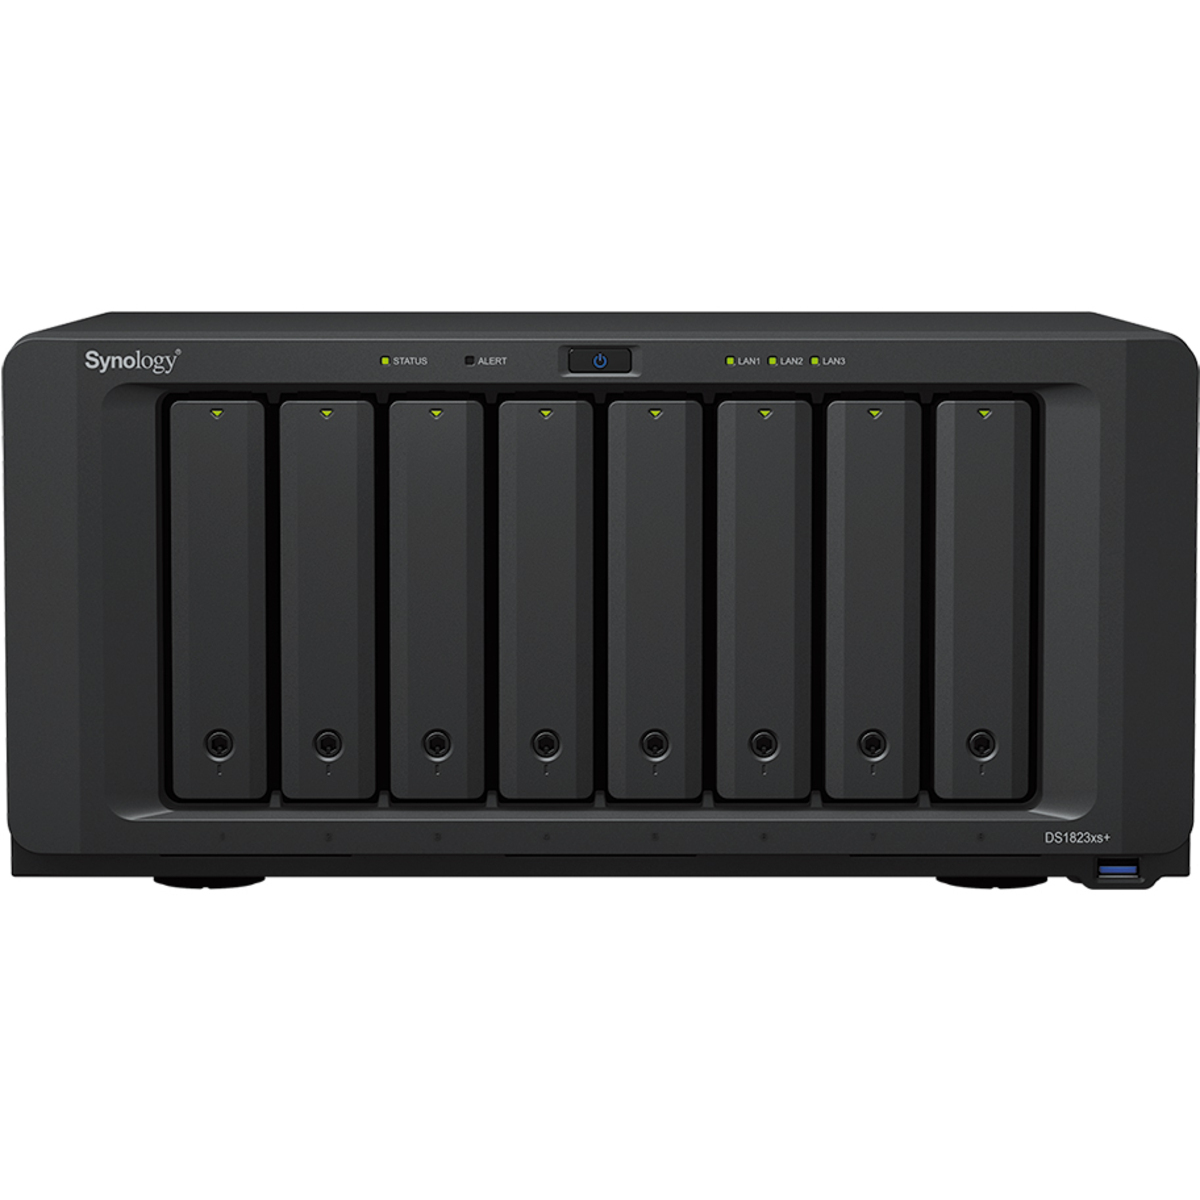 Synology DiskStation DS1823xs+ 40tb 8-Bay Desktop Multimedia / Power User / Business NAS - Network Attached Storage Device 5x8tb Seagate EXOS 7E10 ST8000NM017B 3.5 7200rpm SATA 6Gb/s HDD ENTERPRISE Class Drives Installed - Burn-In Tested DiskStation DS1823xs+